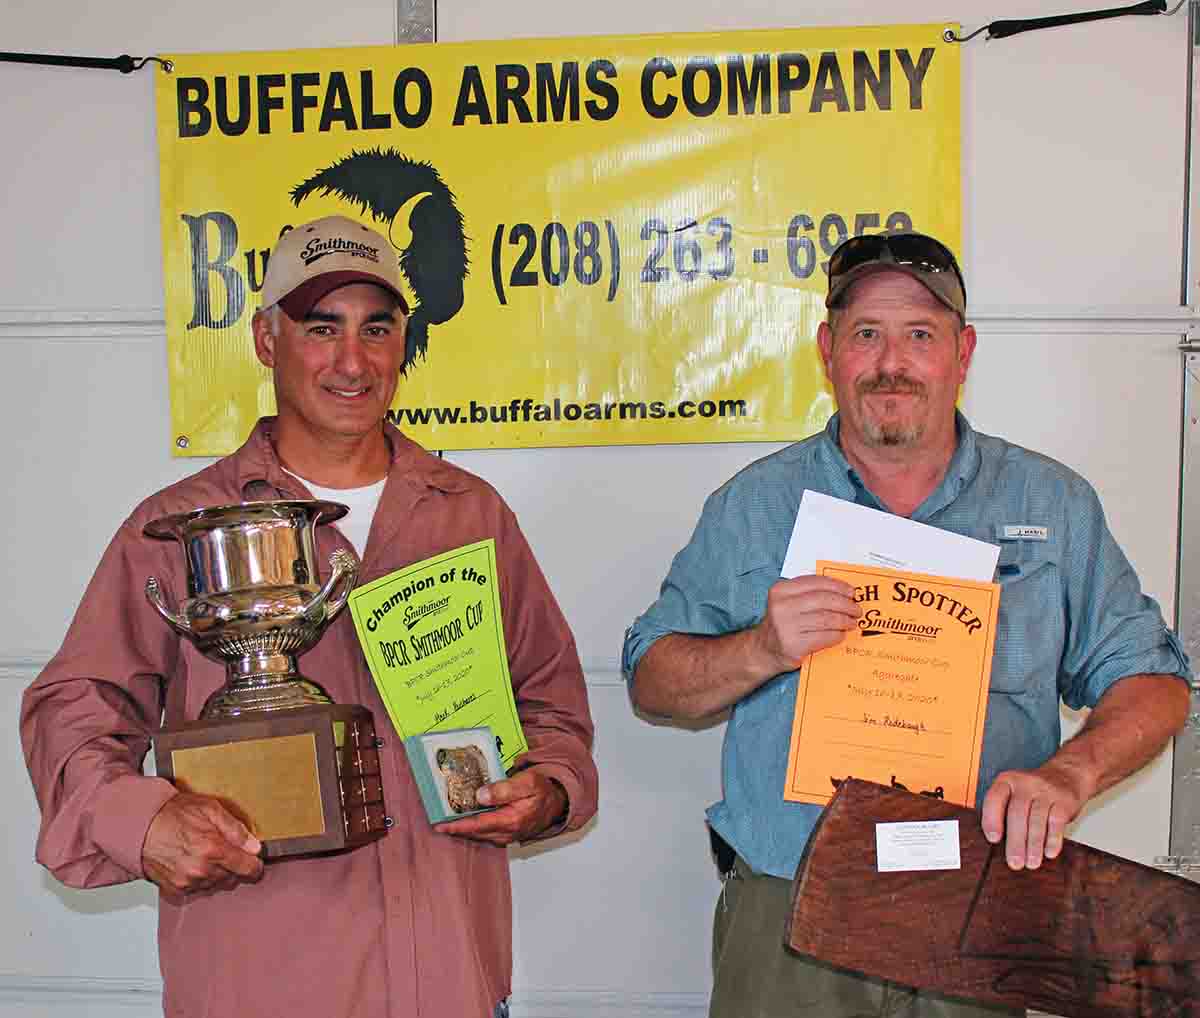 Left to right; Mark Pachares, BPCR Match Winner and Jim Rodebaugh, High Spotter.